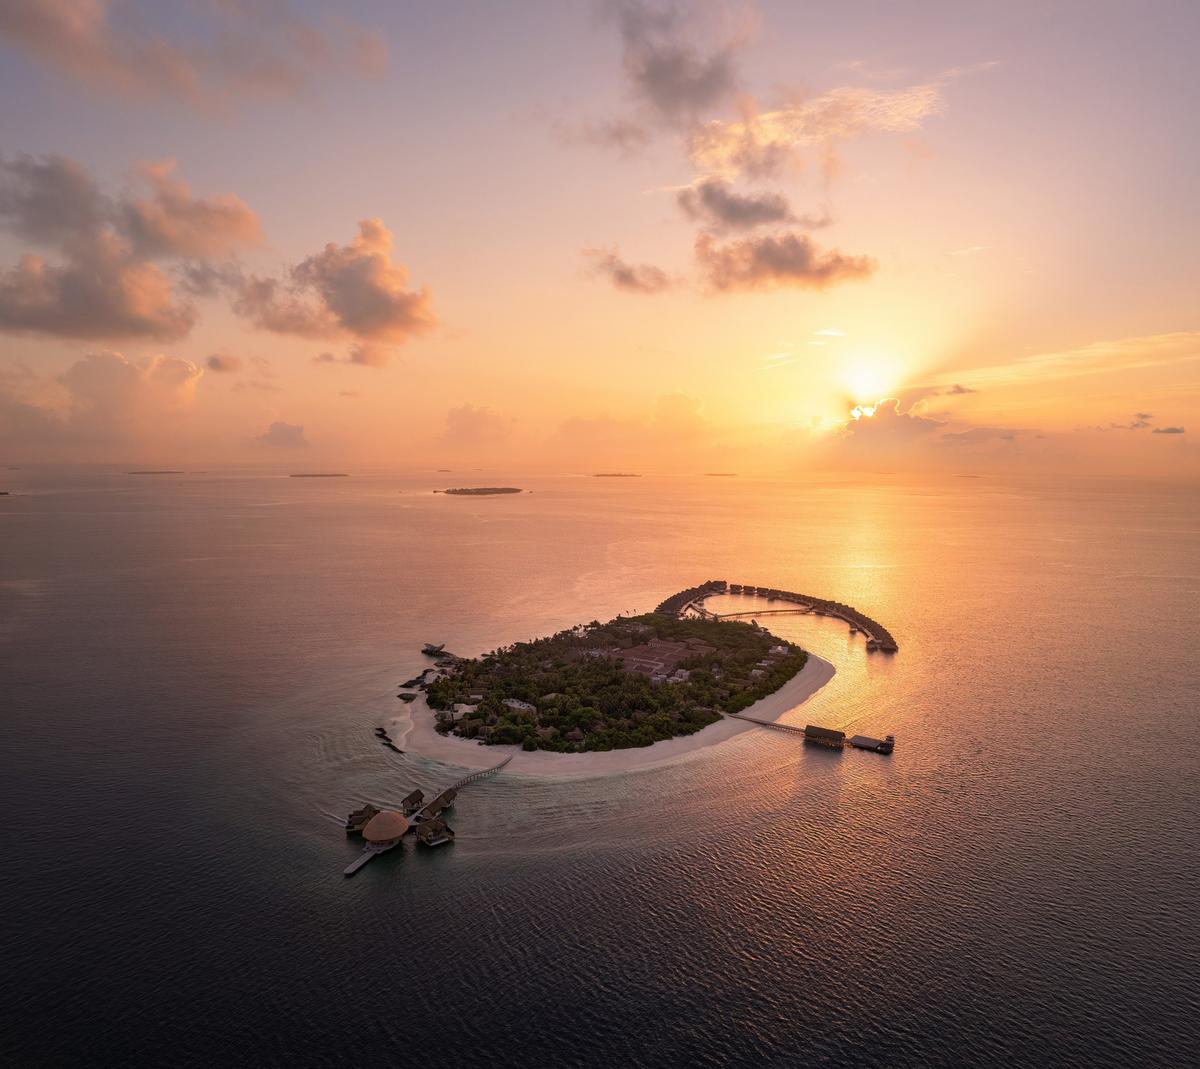 Joali being is located on the secluded island of Bodufushi in the Raa Atoll in The Maldives